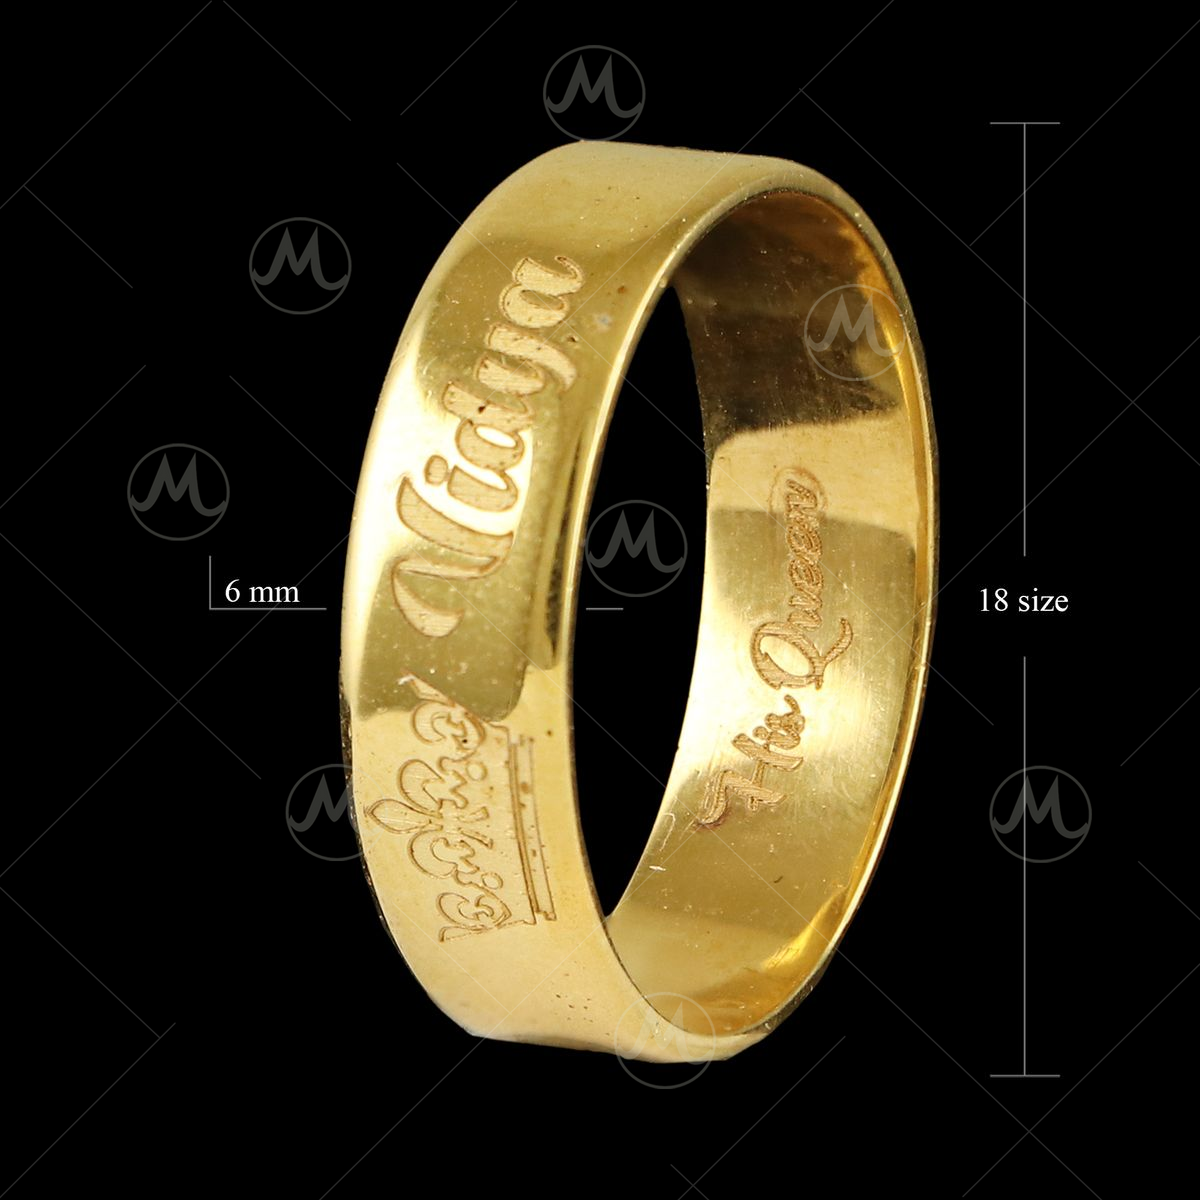 Plain Gold Wedding Rings And Bands Without Diamonds and Stones |